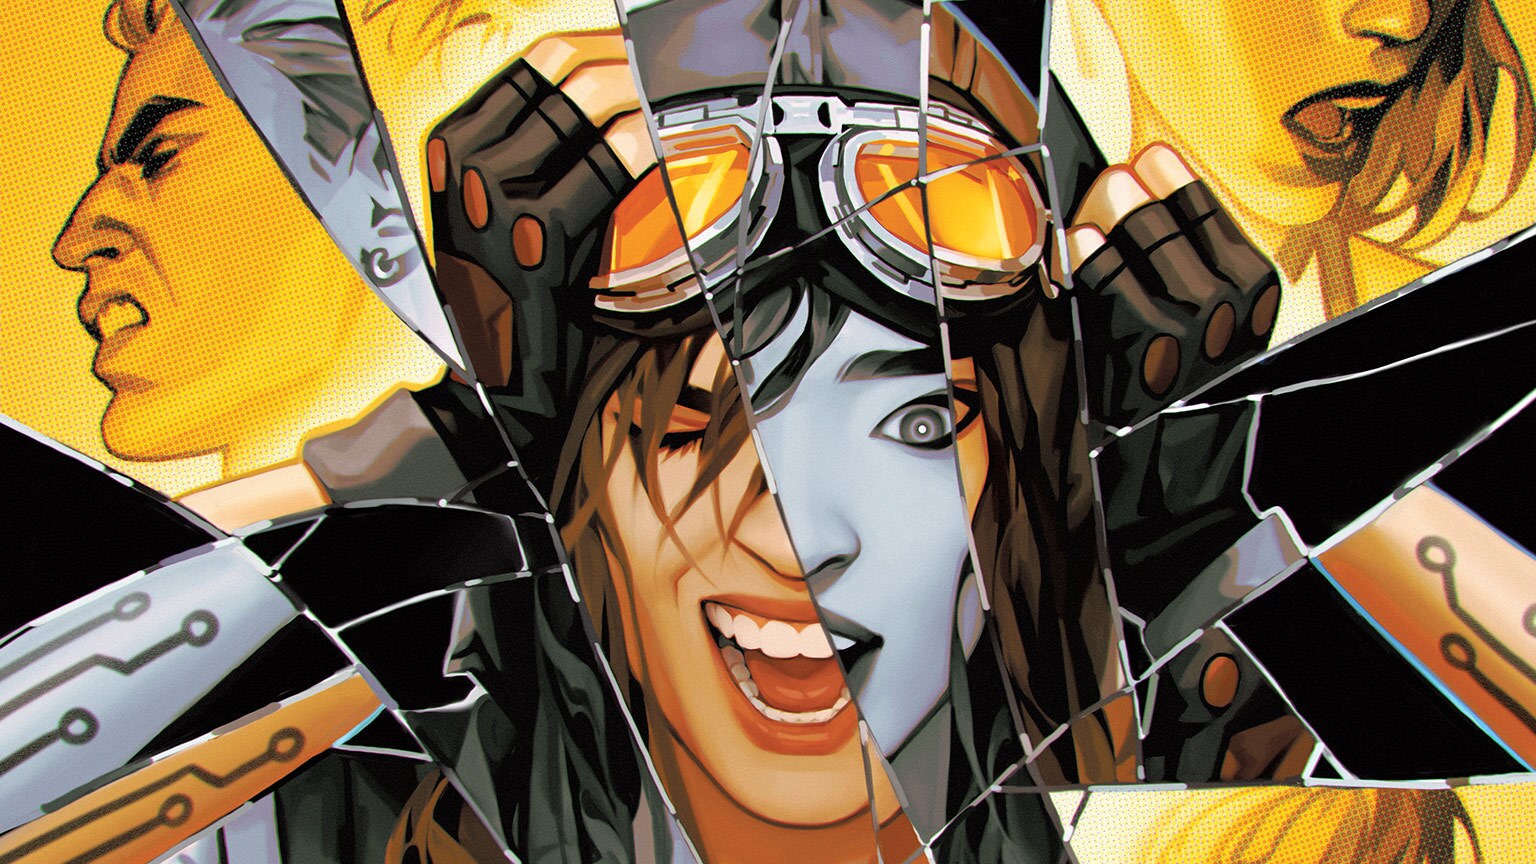 Running Out of Options in Marvel’s Doctor Aphra #3 - Exclusive Preview